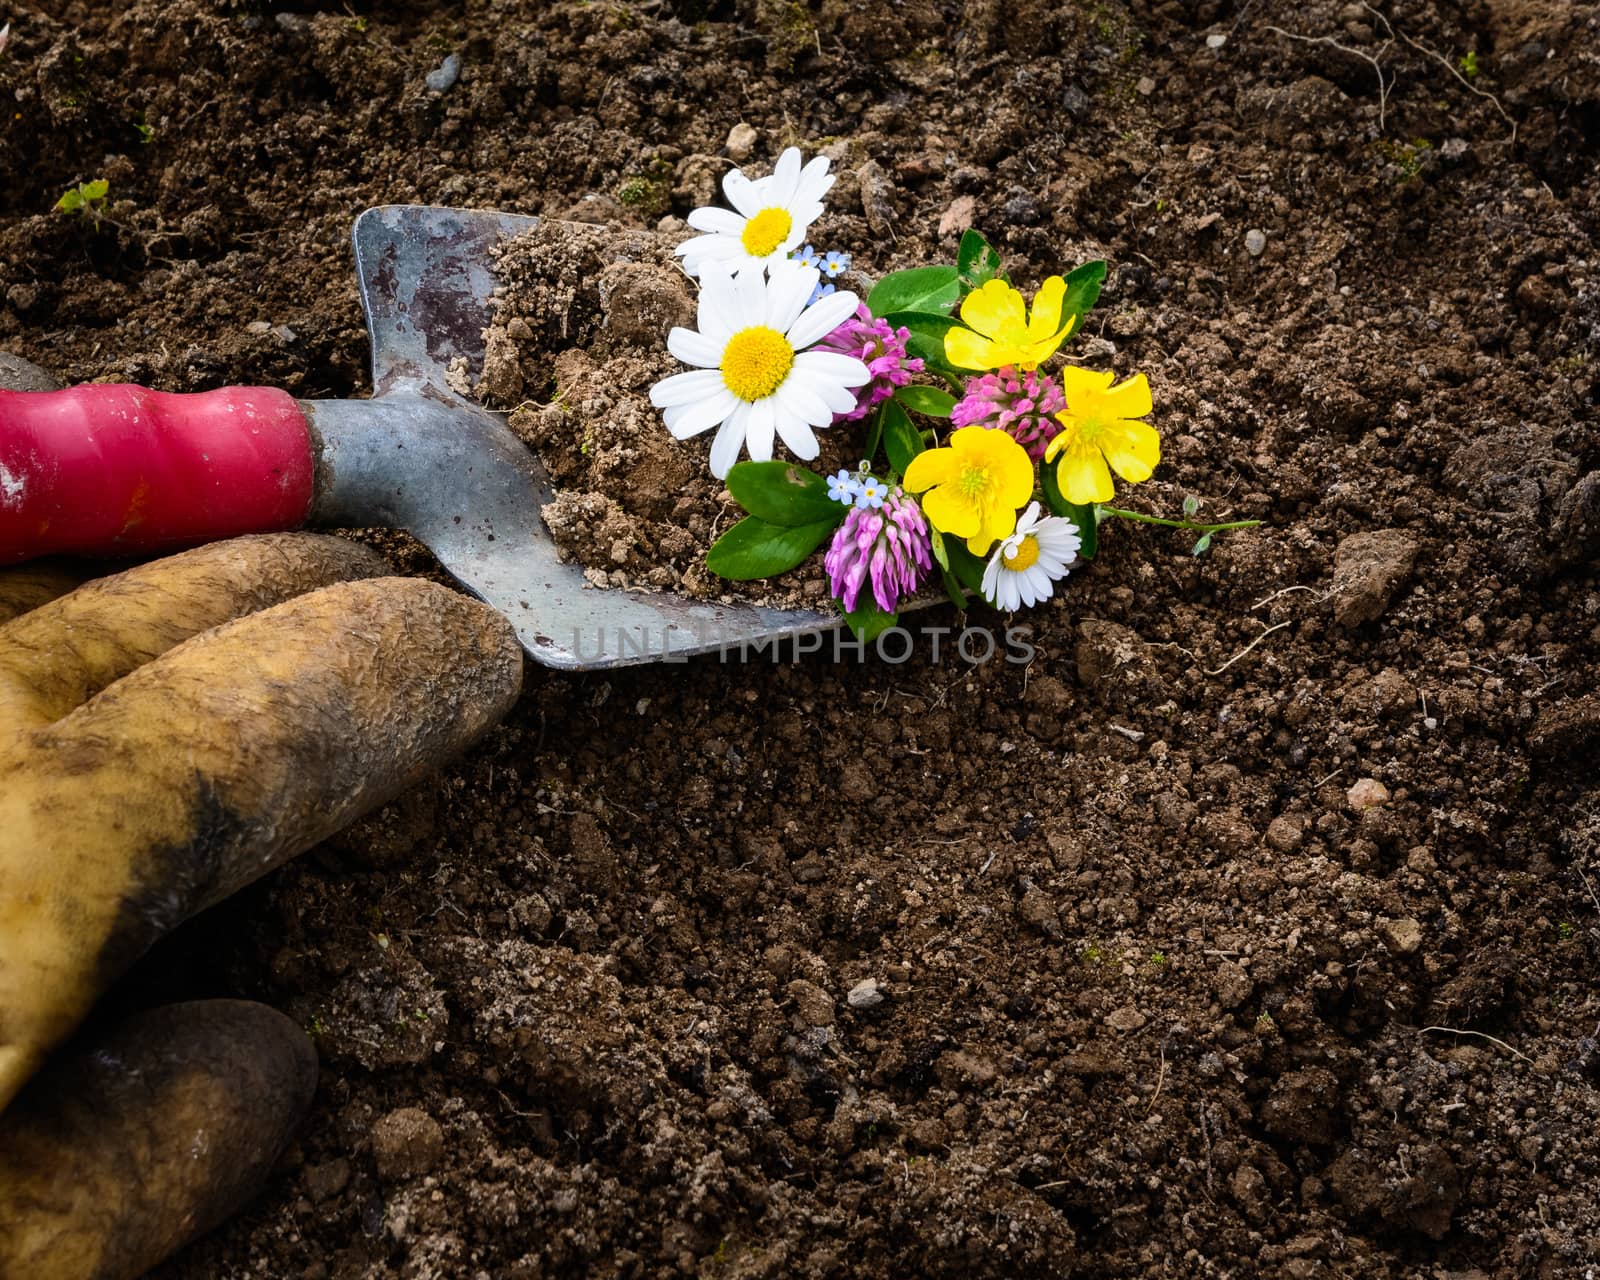 pictured a glove and gardening with a shovel in the ground , wildflowers and daisies